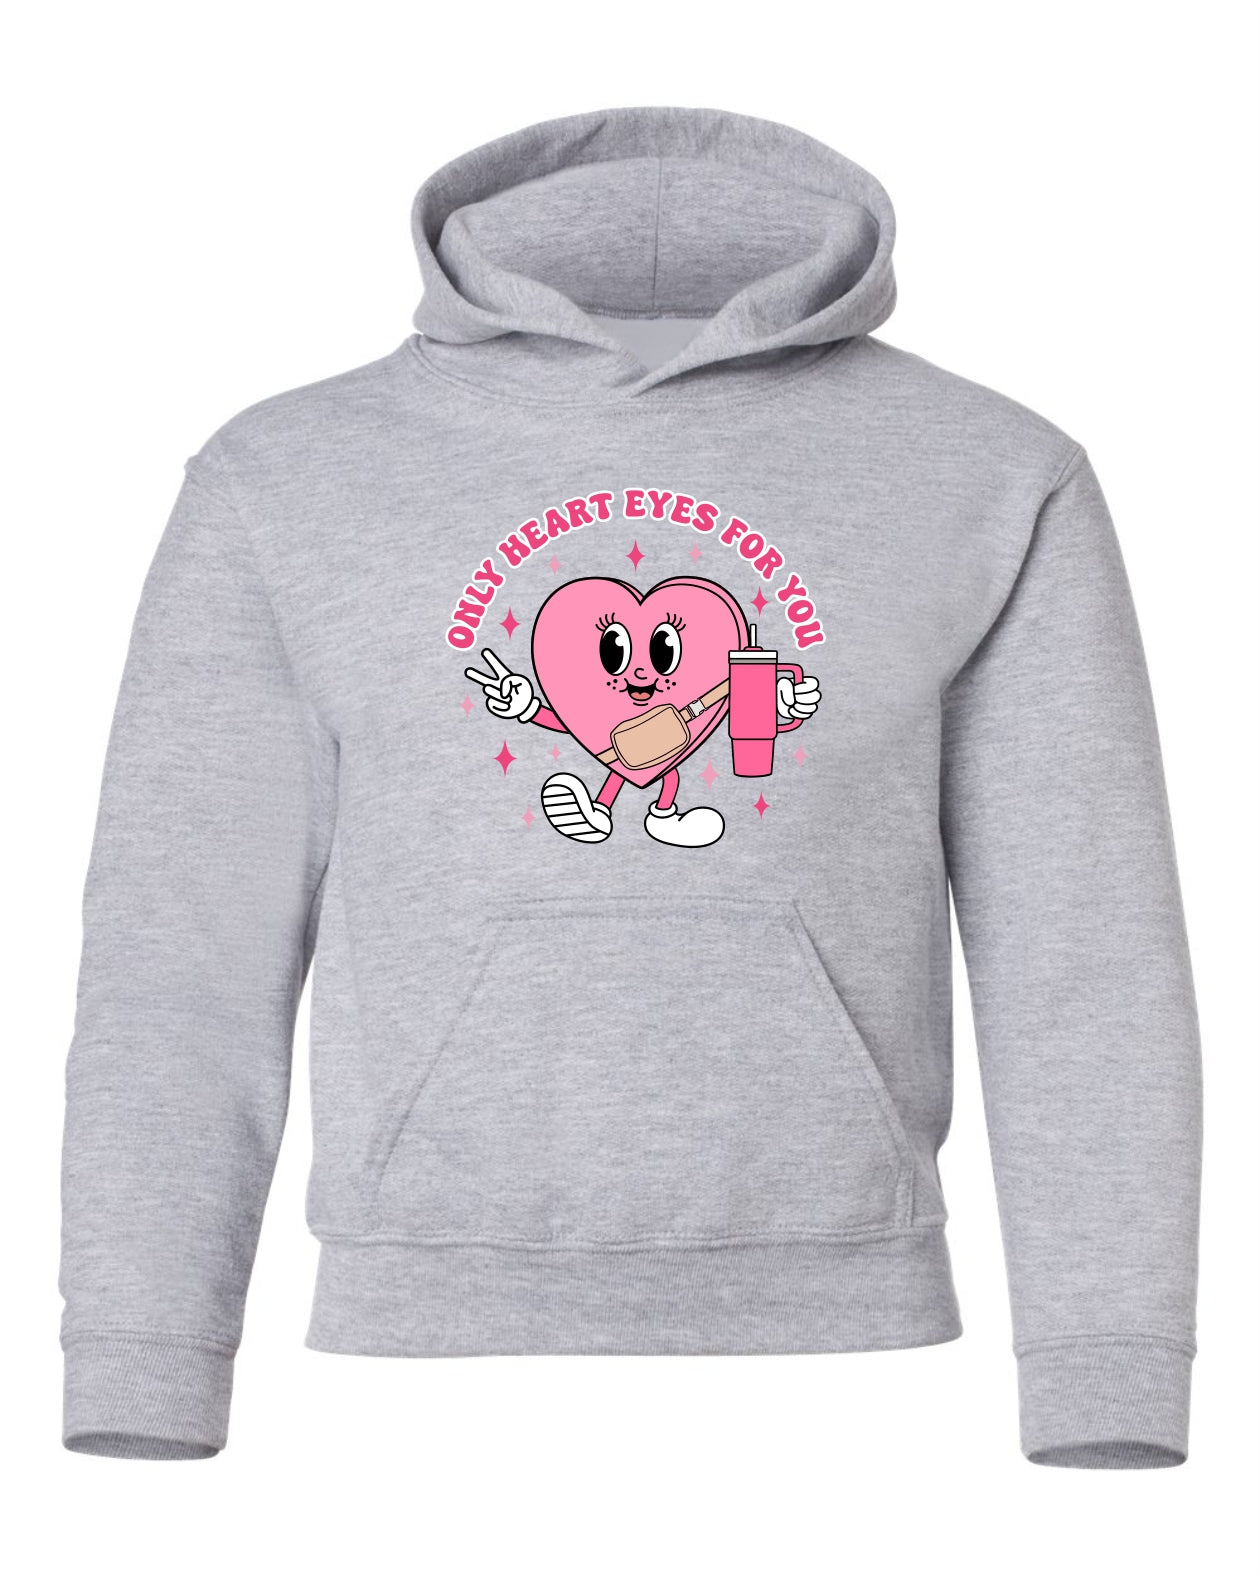 "Only Heart Eyes For You" Youth Hoodie